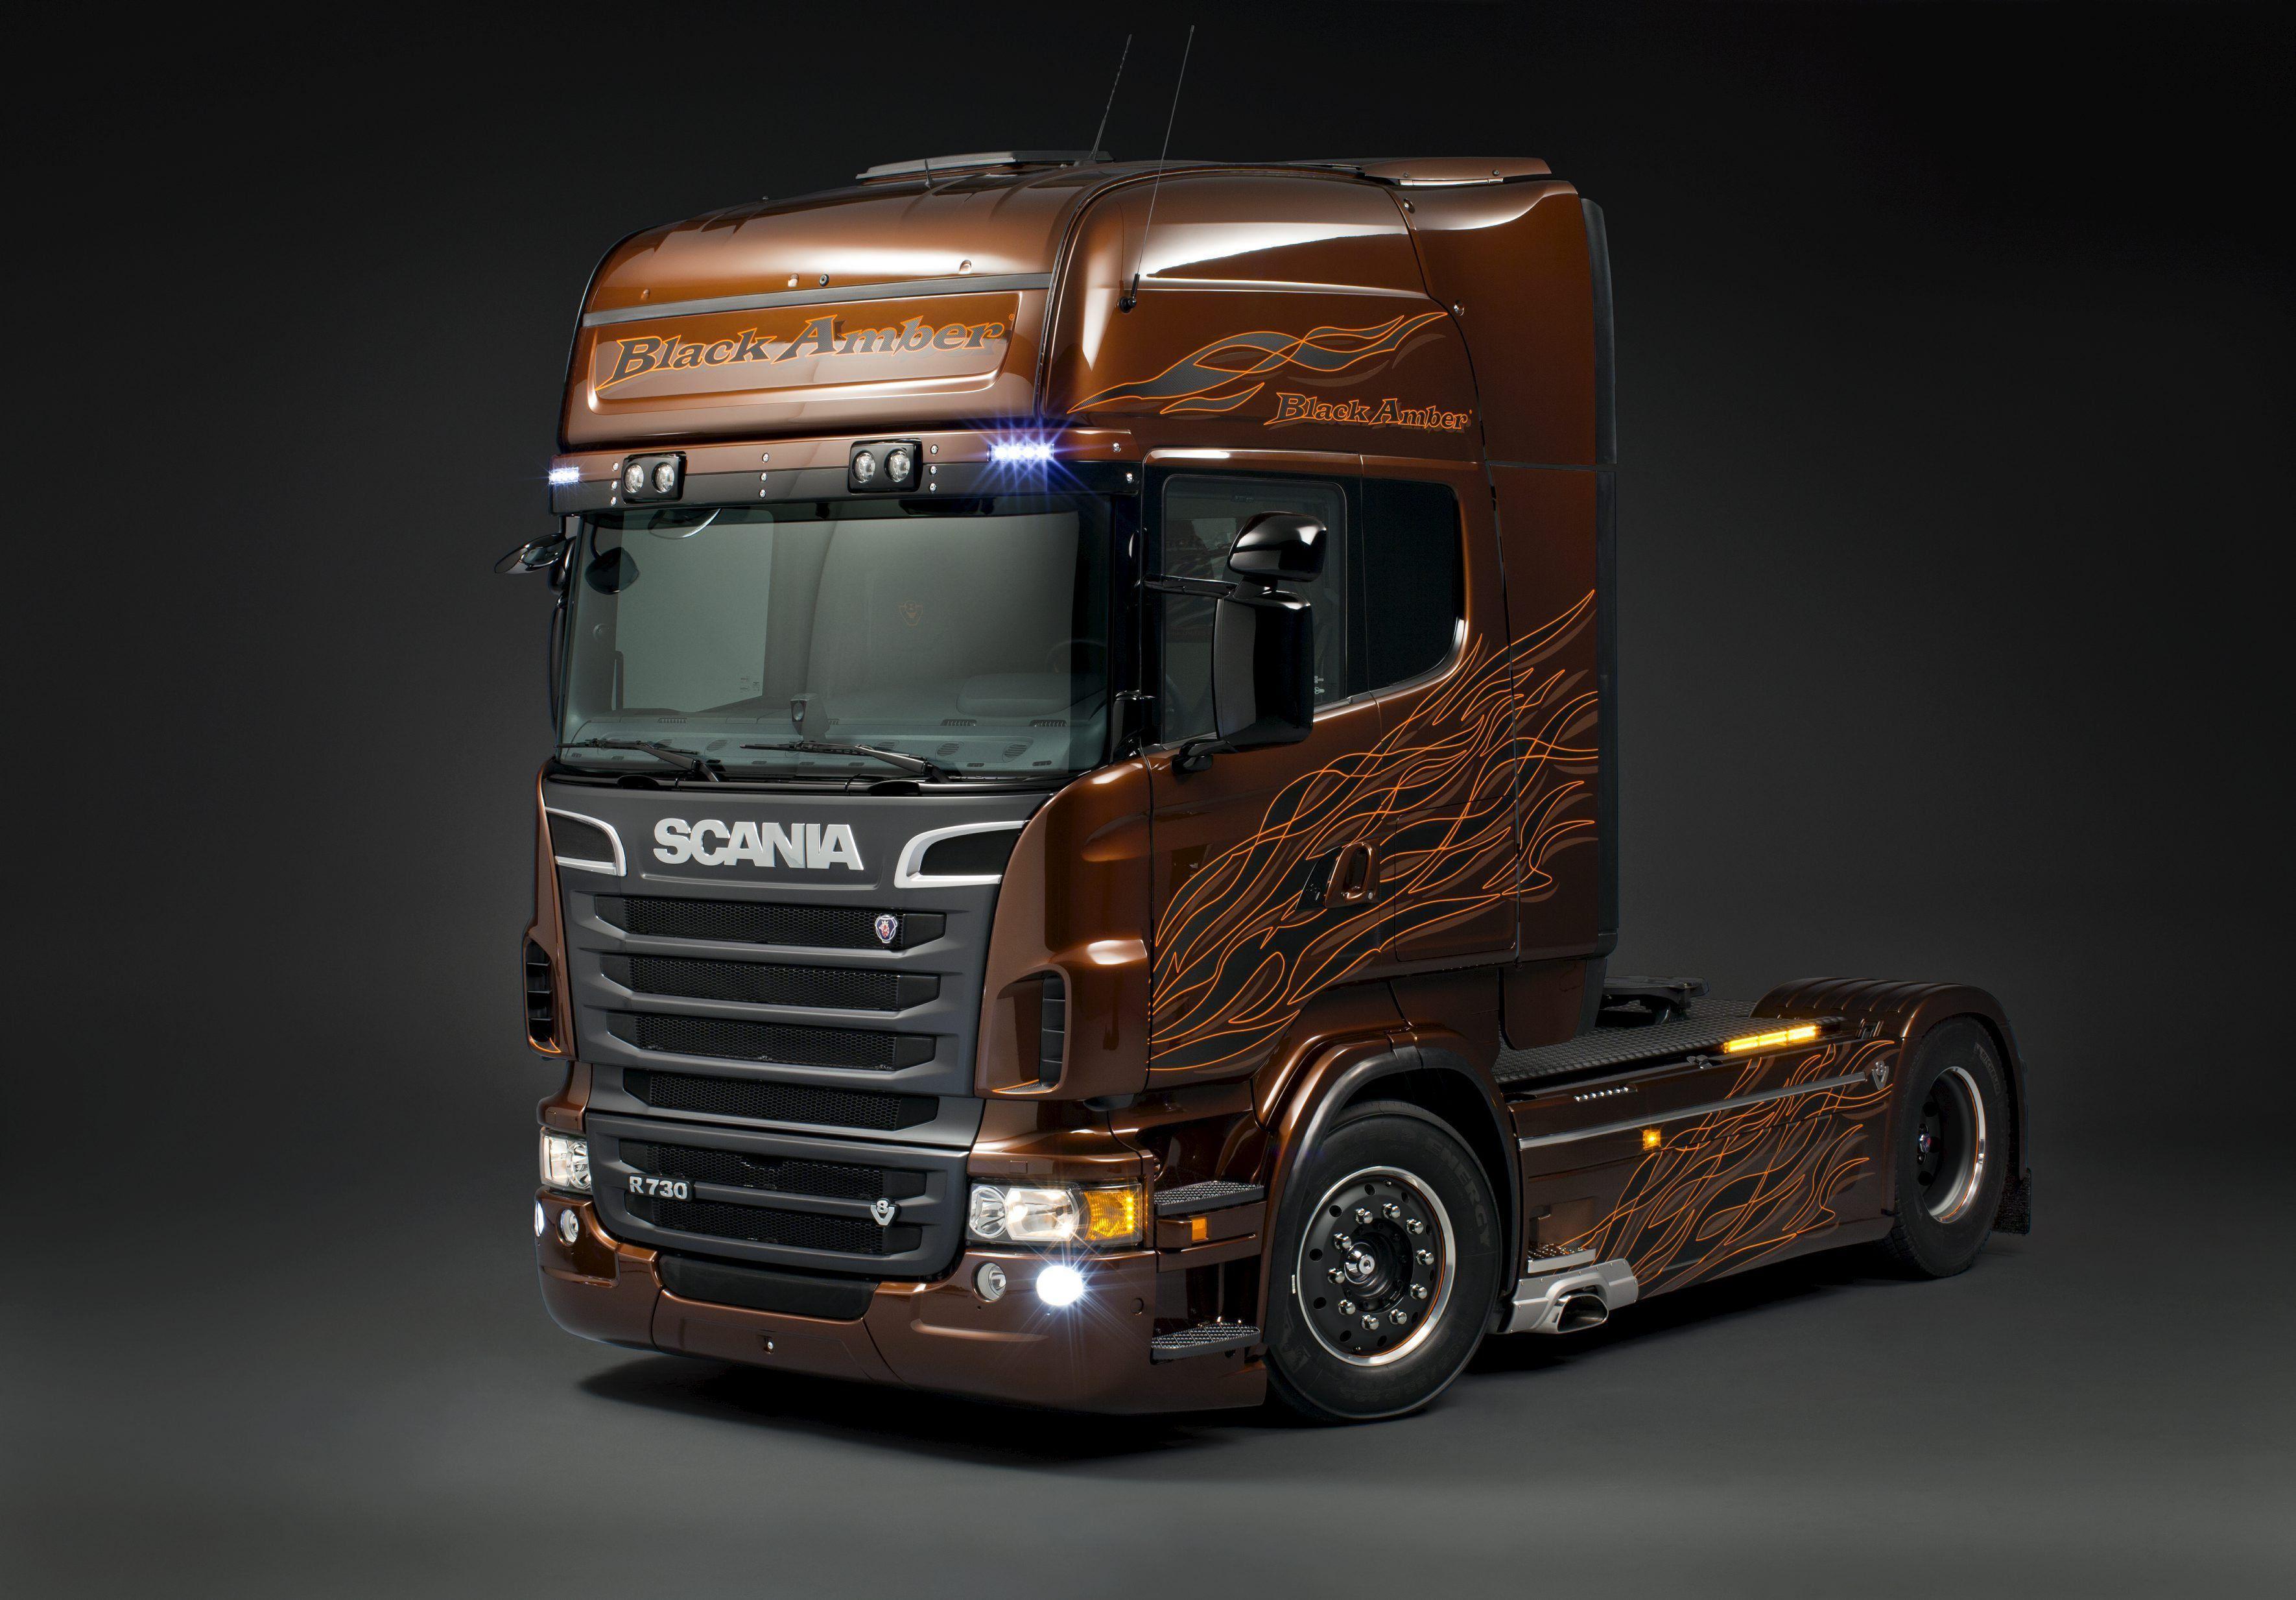 Scania Wallpaper Free Scania Background